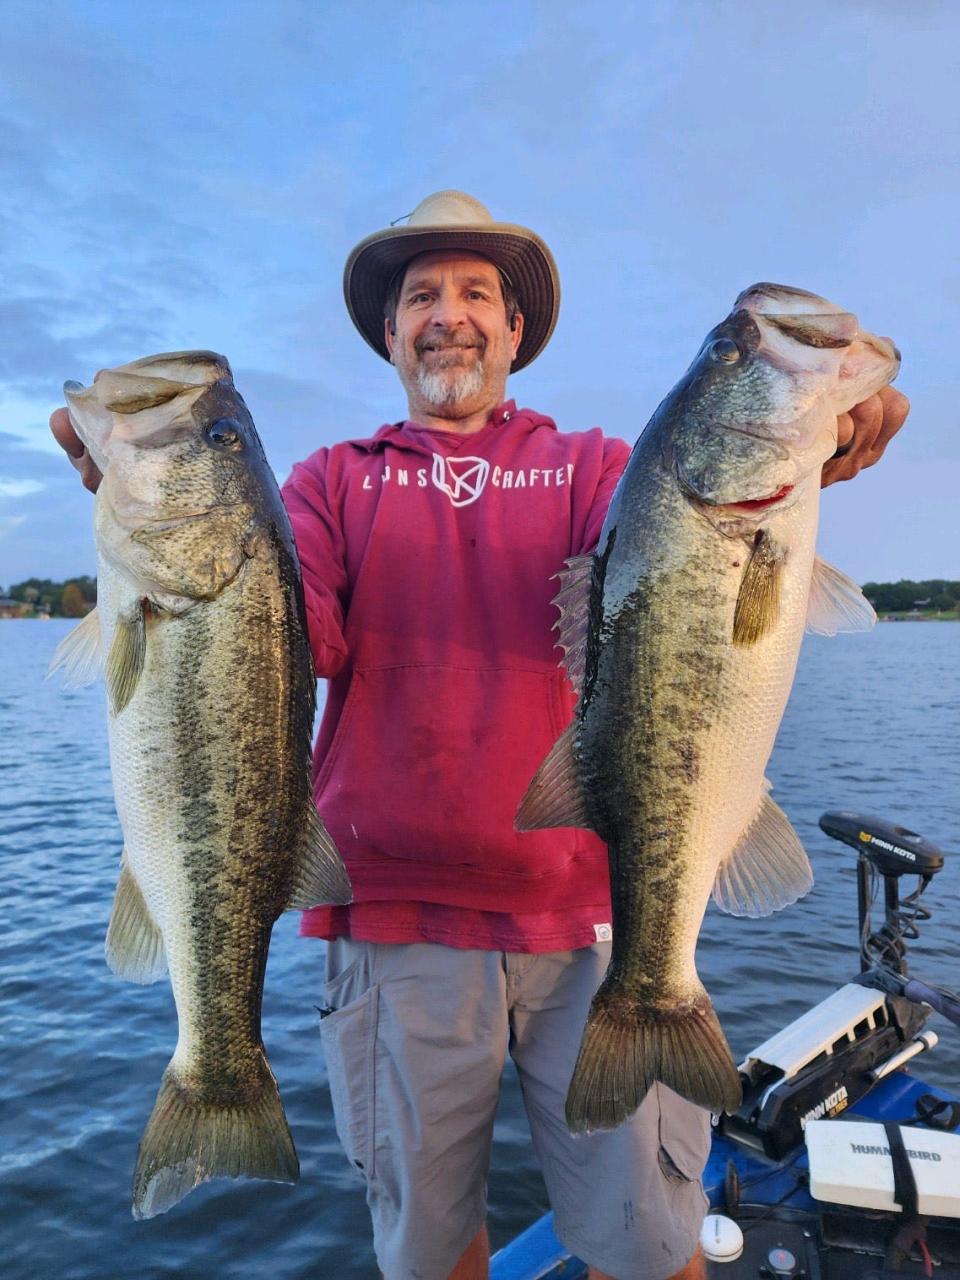 Alan Lyons, of Ventura, California, shows off a couple of 6-pound bass he caught while on a guided fishing tour with Capt. Bill Goudy.